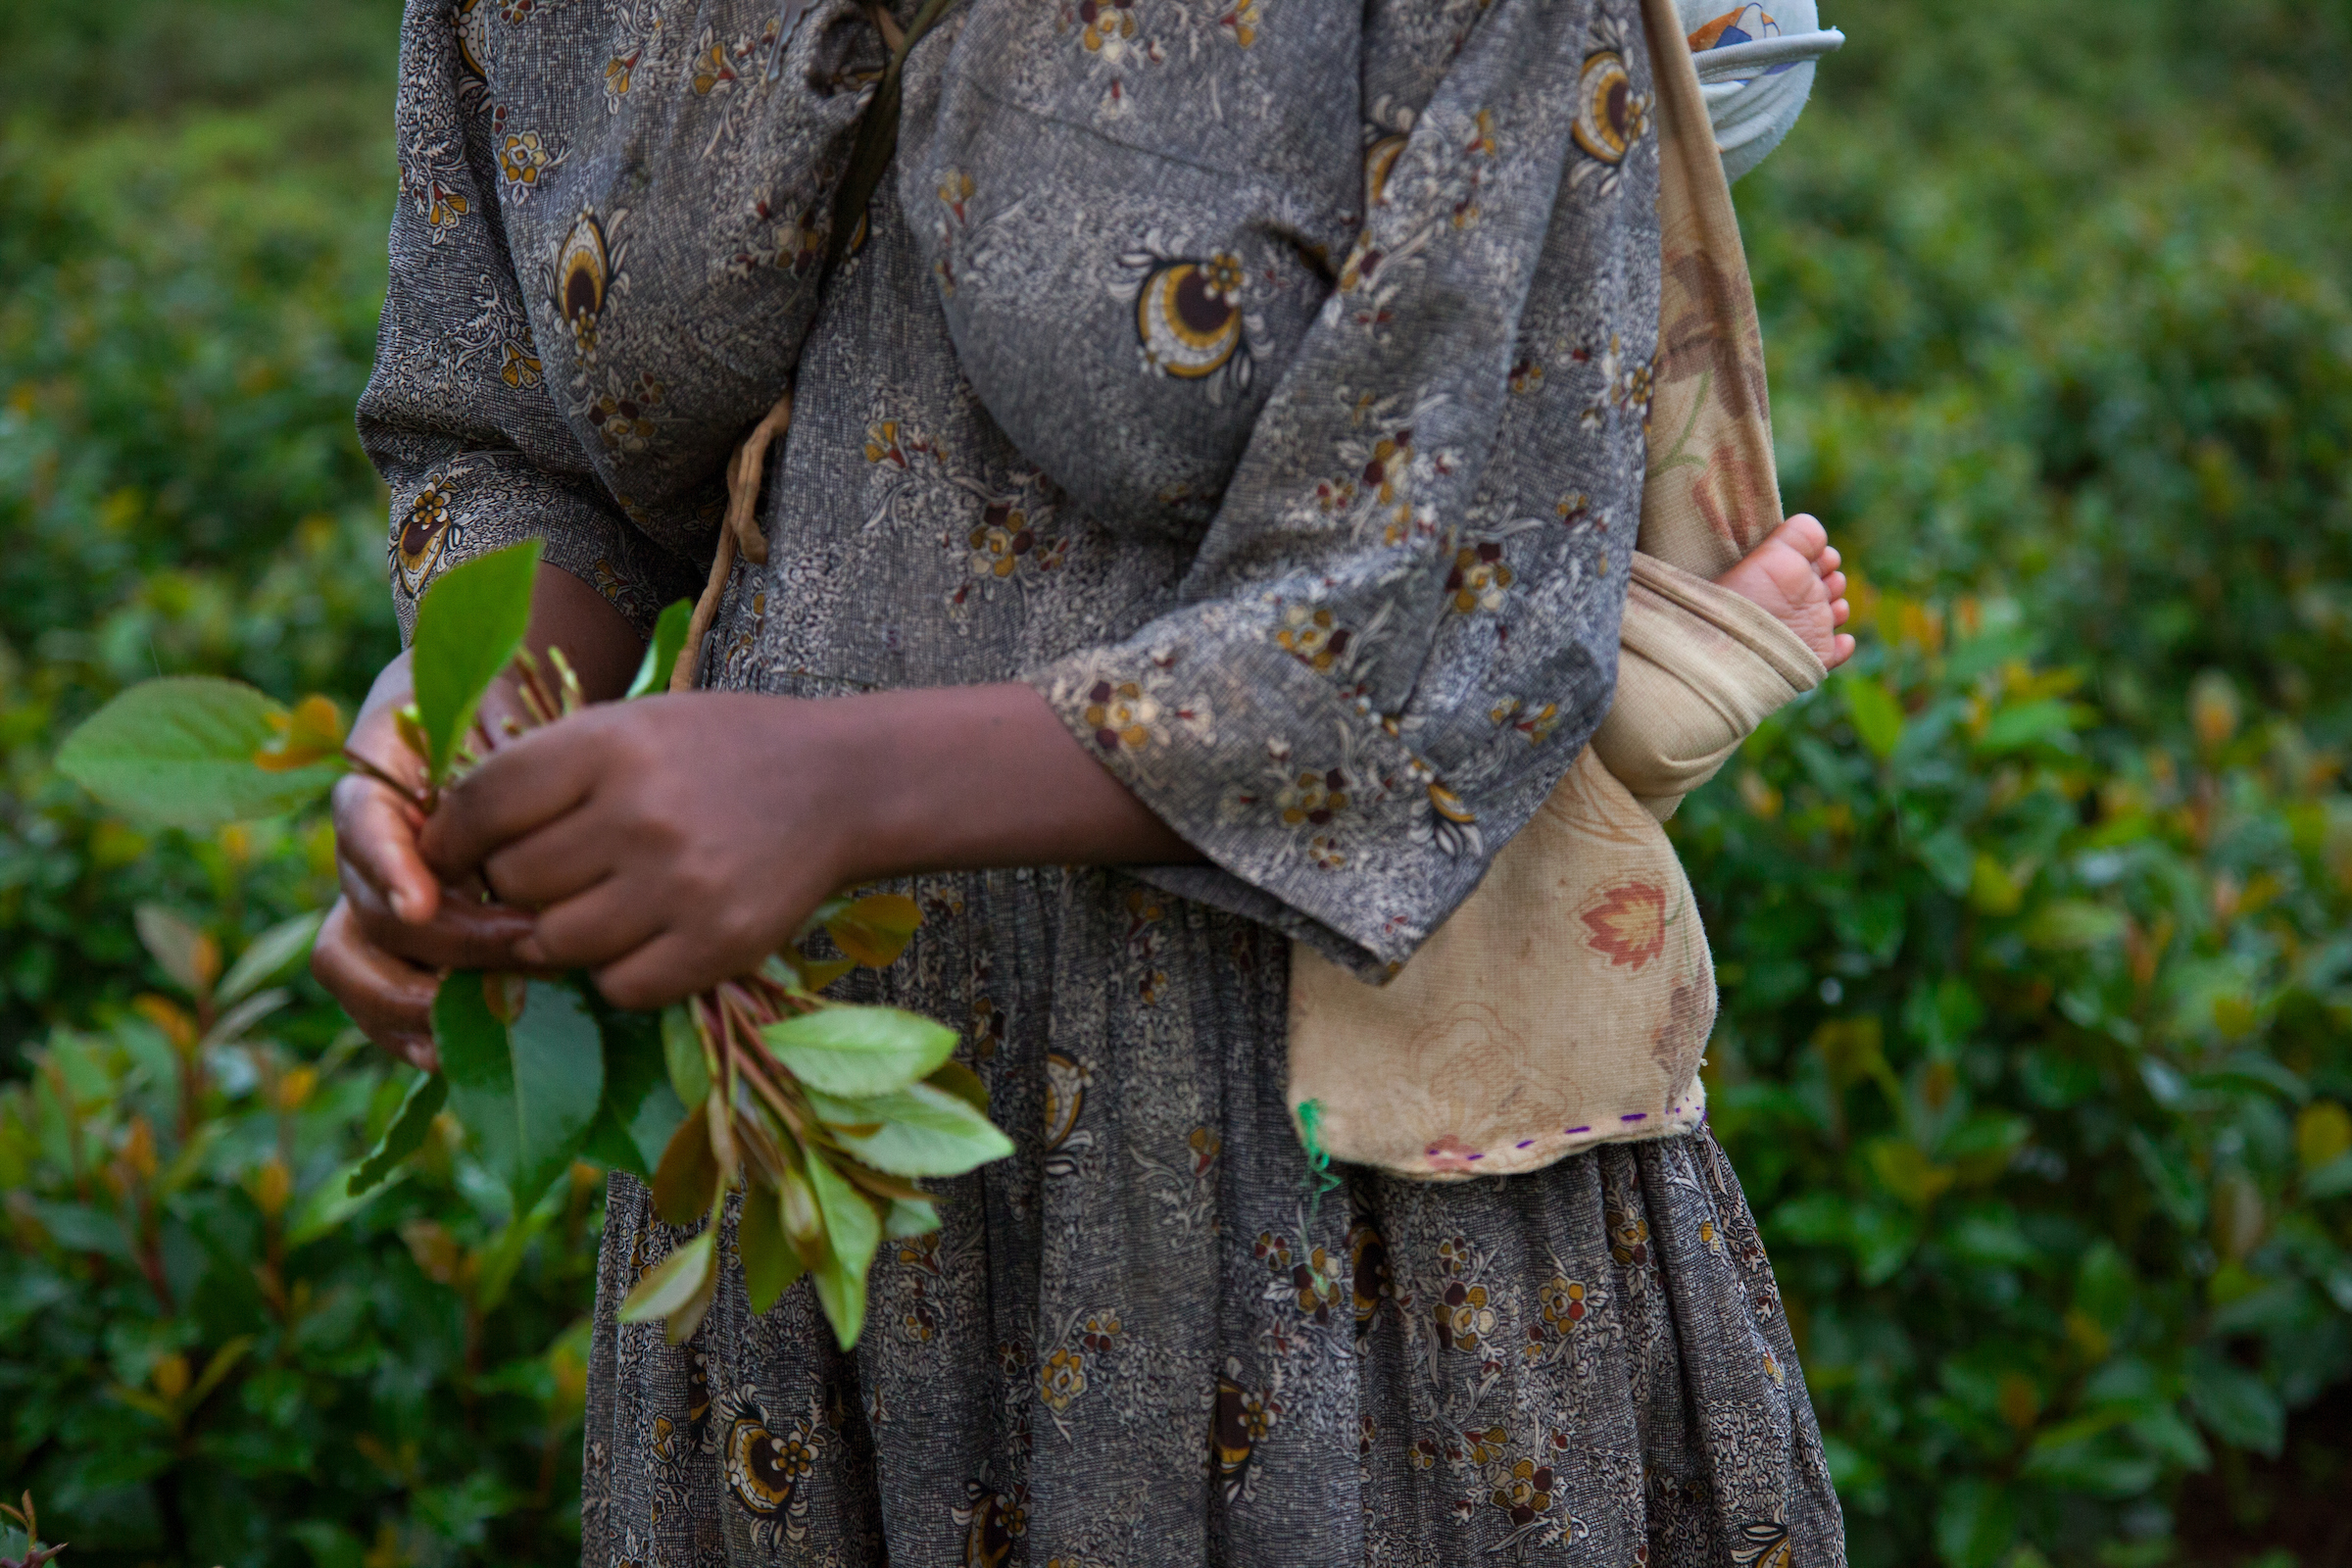 Fifteen-year-old Destaye attends to the family’s crops with her son in tow.